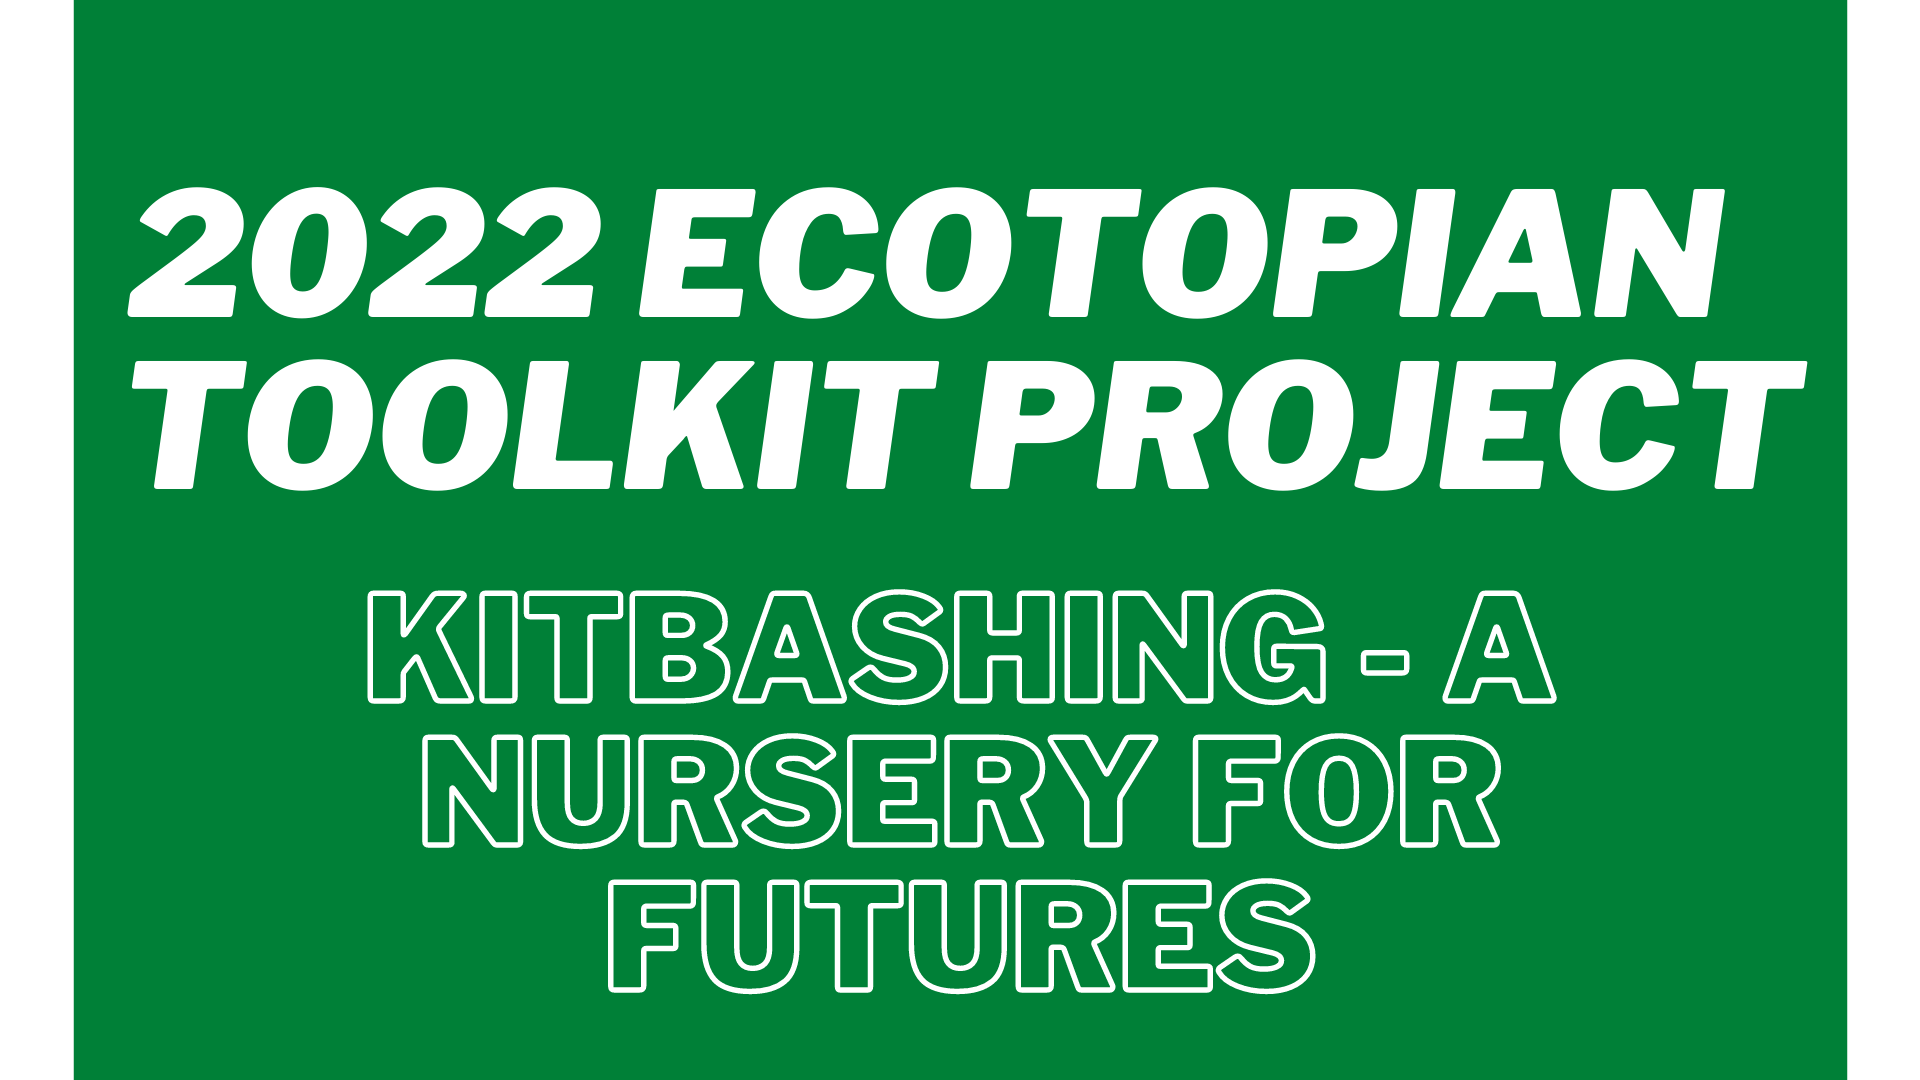 2022 Ecotopian Toolkit Project text